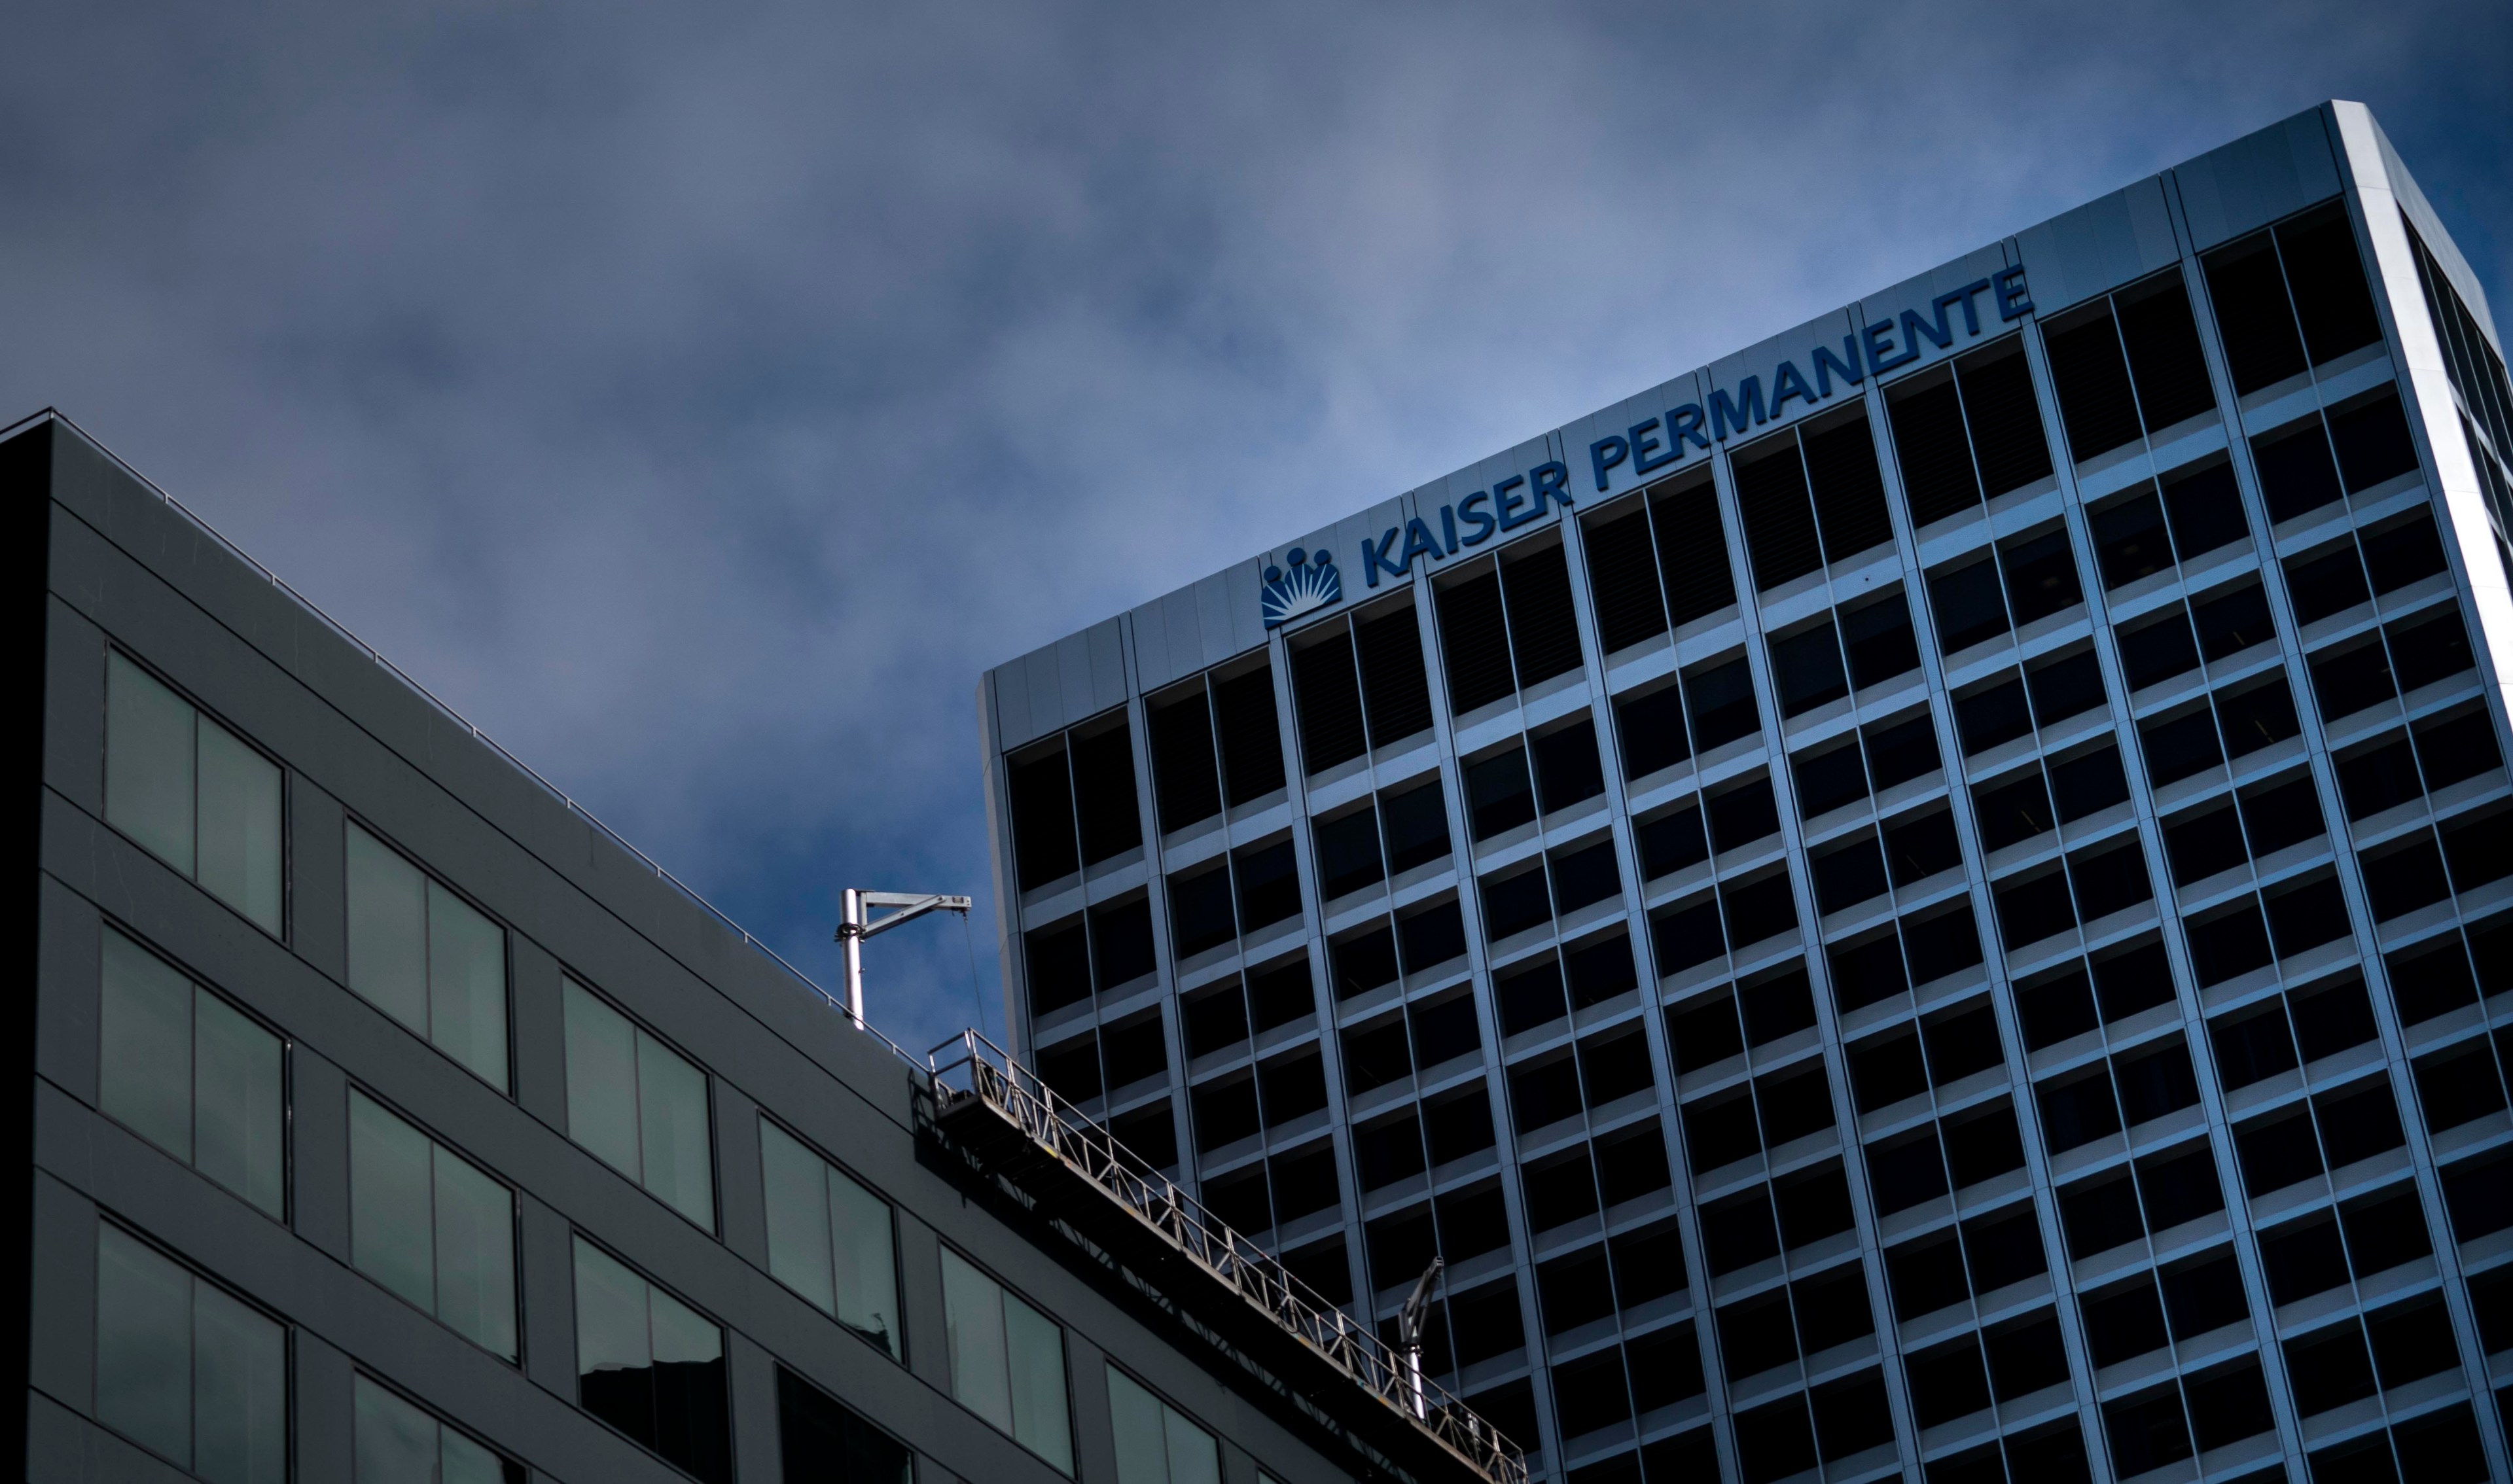 The Kaiser Permanente logo is seen on a building, with a gray, cloudy sky in the background